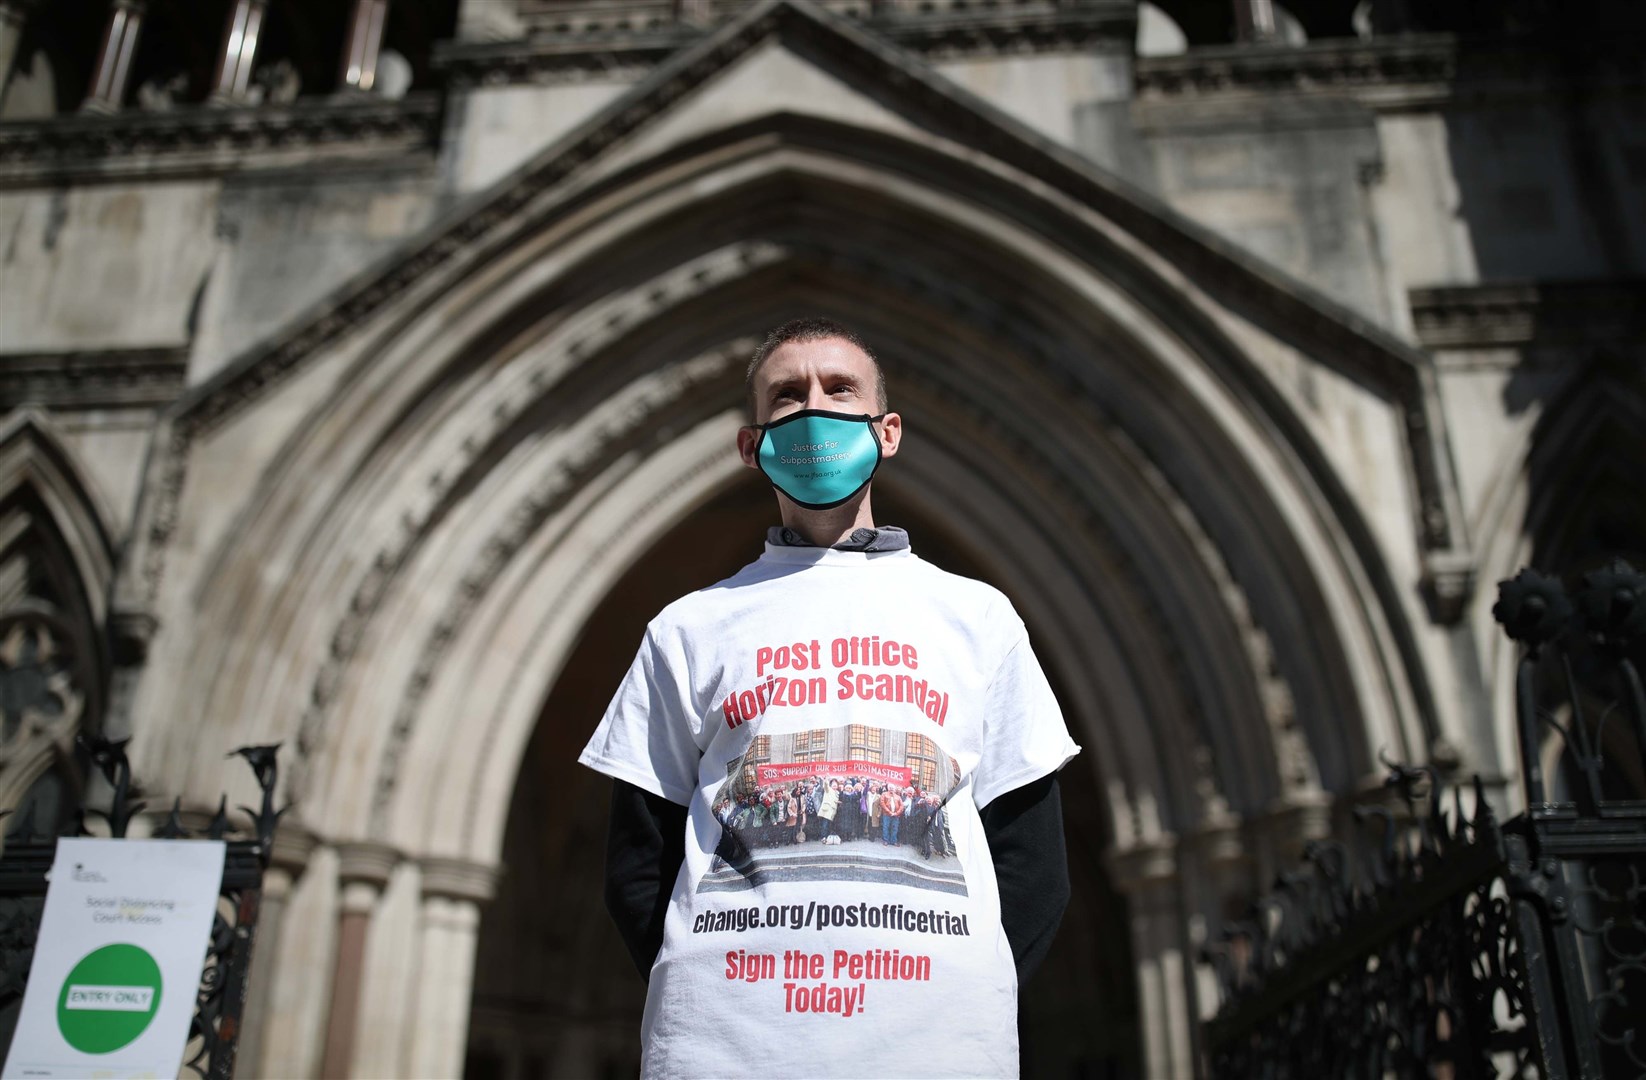 Protesters outside the Royal Courts of Justice (Yui Mok/PA)